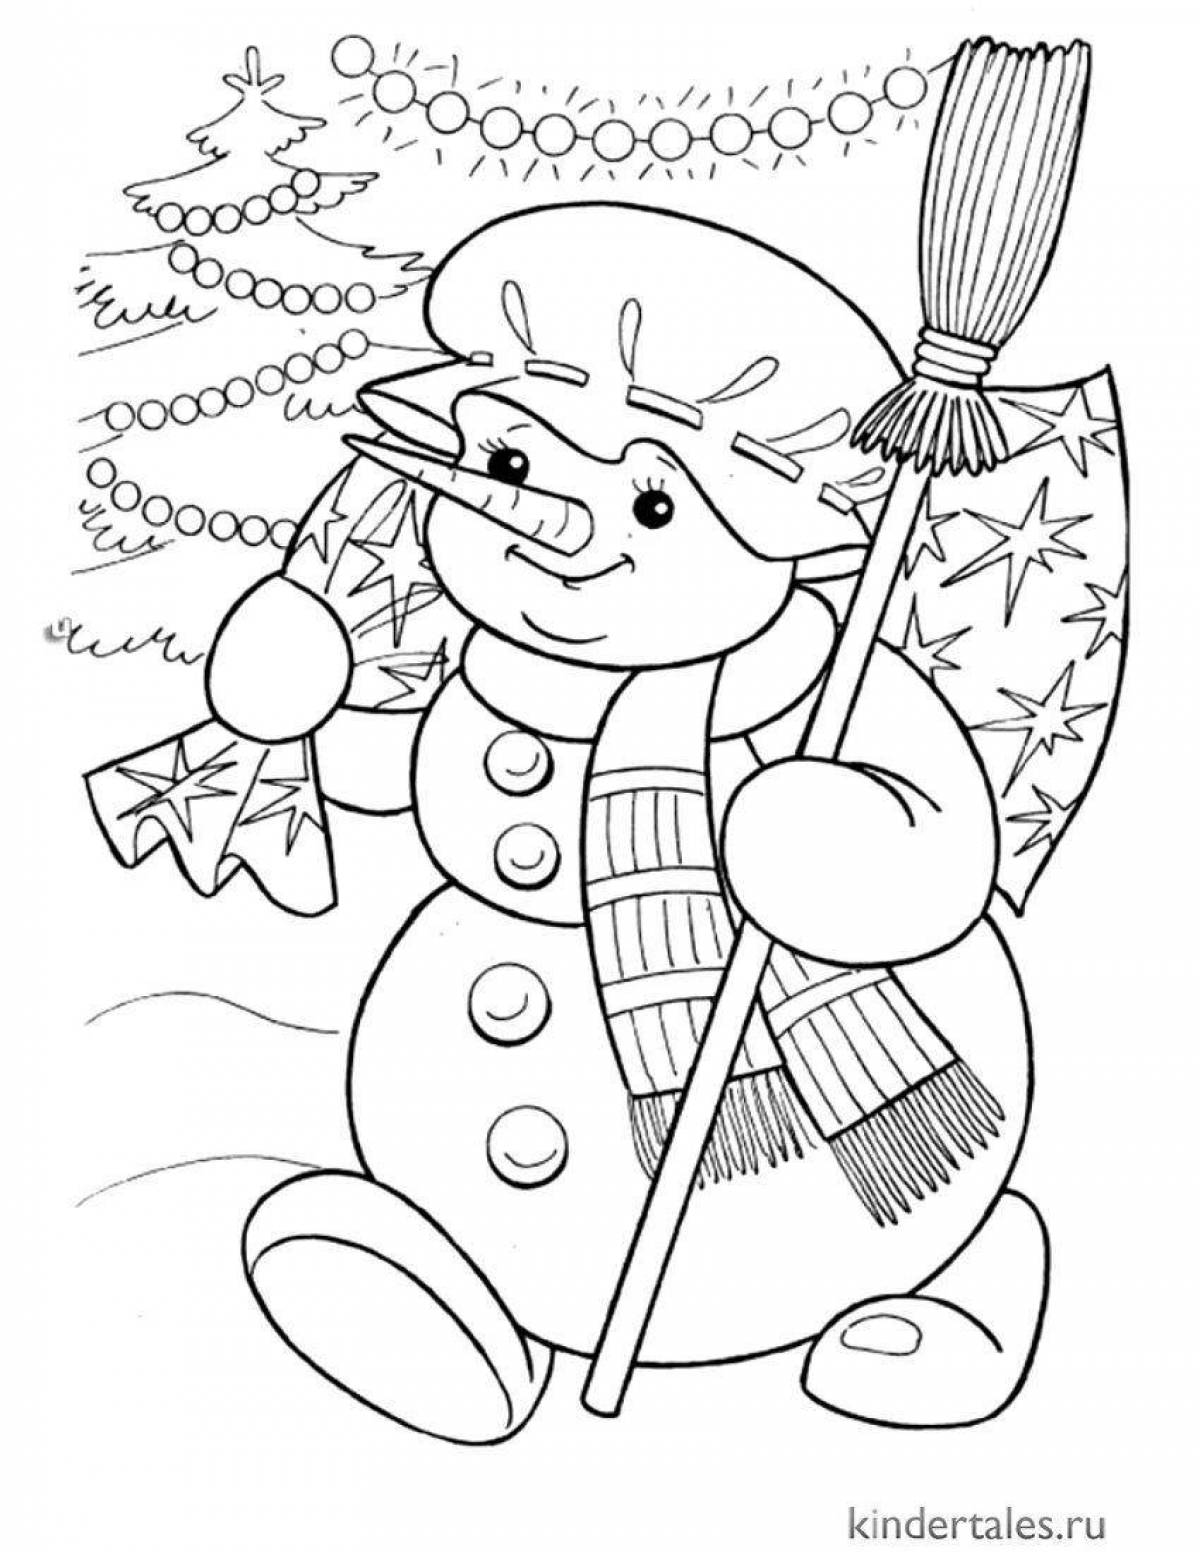 Boisterous coloring page funny snowman for kids